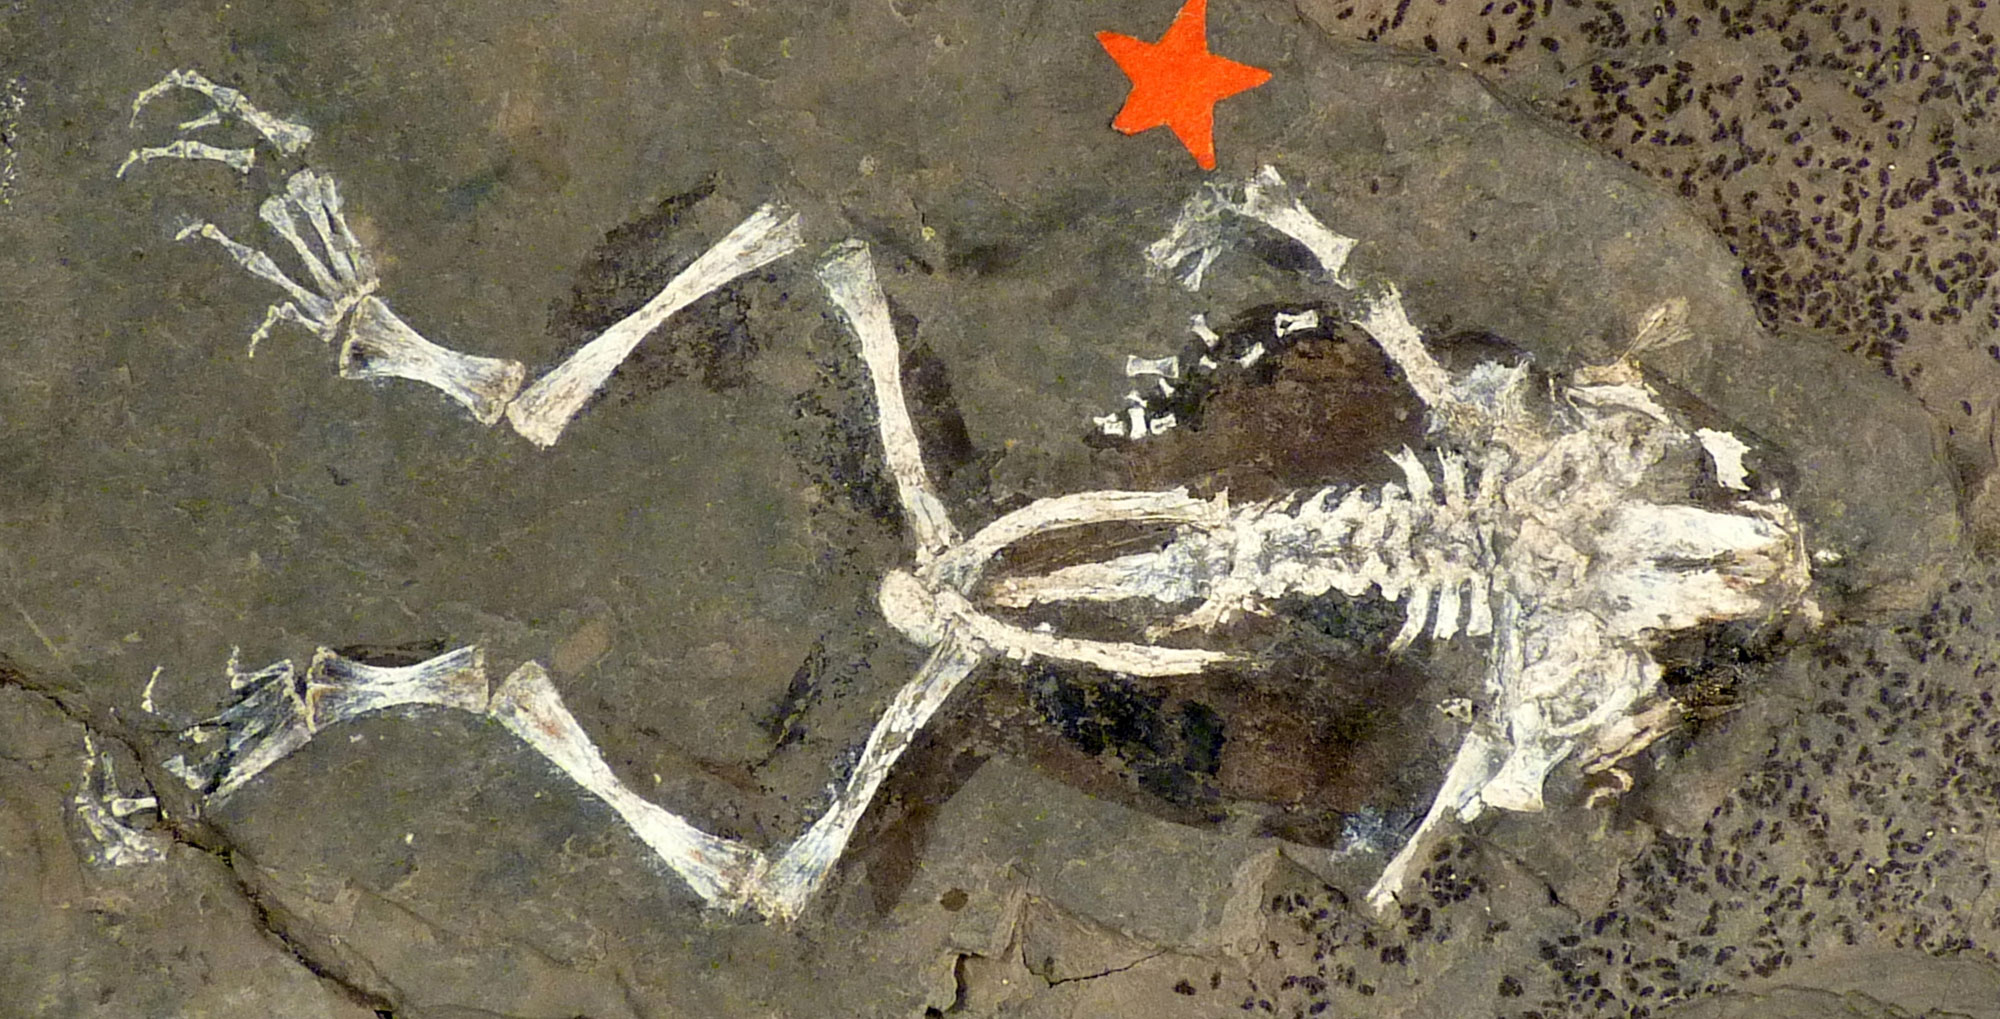 Photograph of a fossil frog from the Miocene of Nevada. The fossil is preserved in gray rock, the bones are white, and a darker-colored region around the bone indicates some of the soft tissue. The rear legs of the frog are long, the head is pointed to the right.